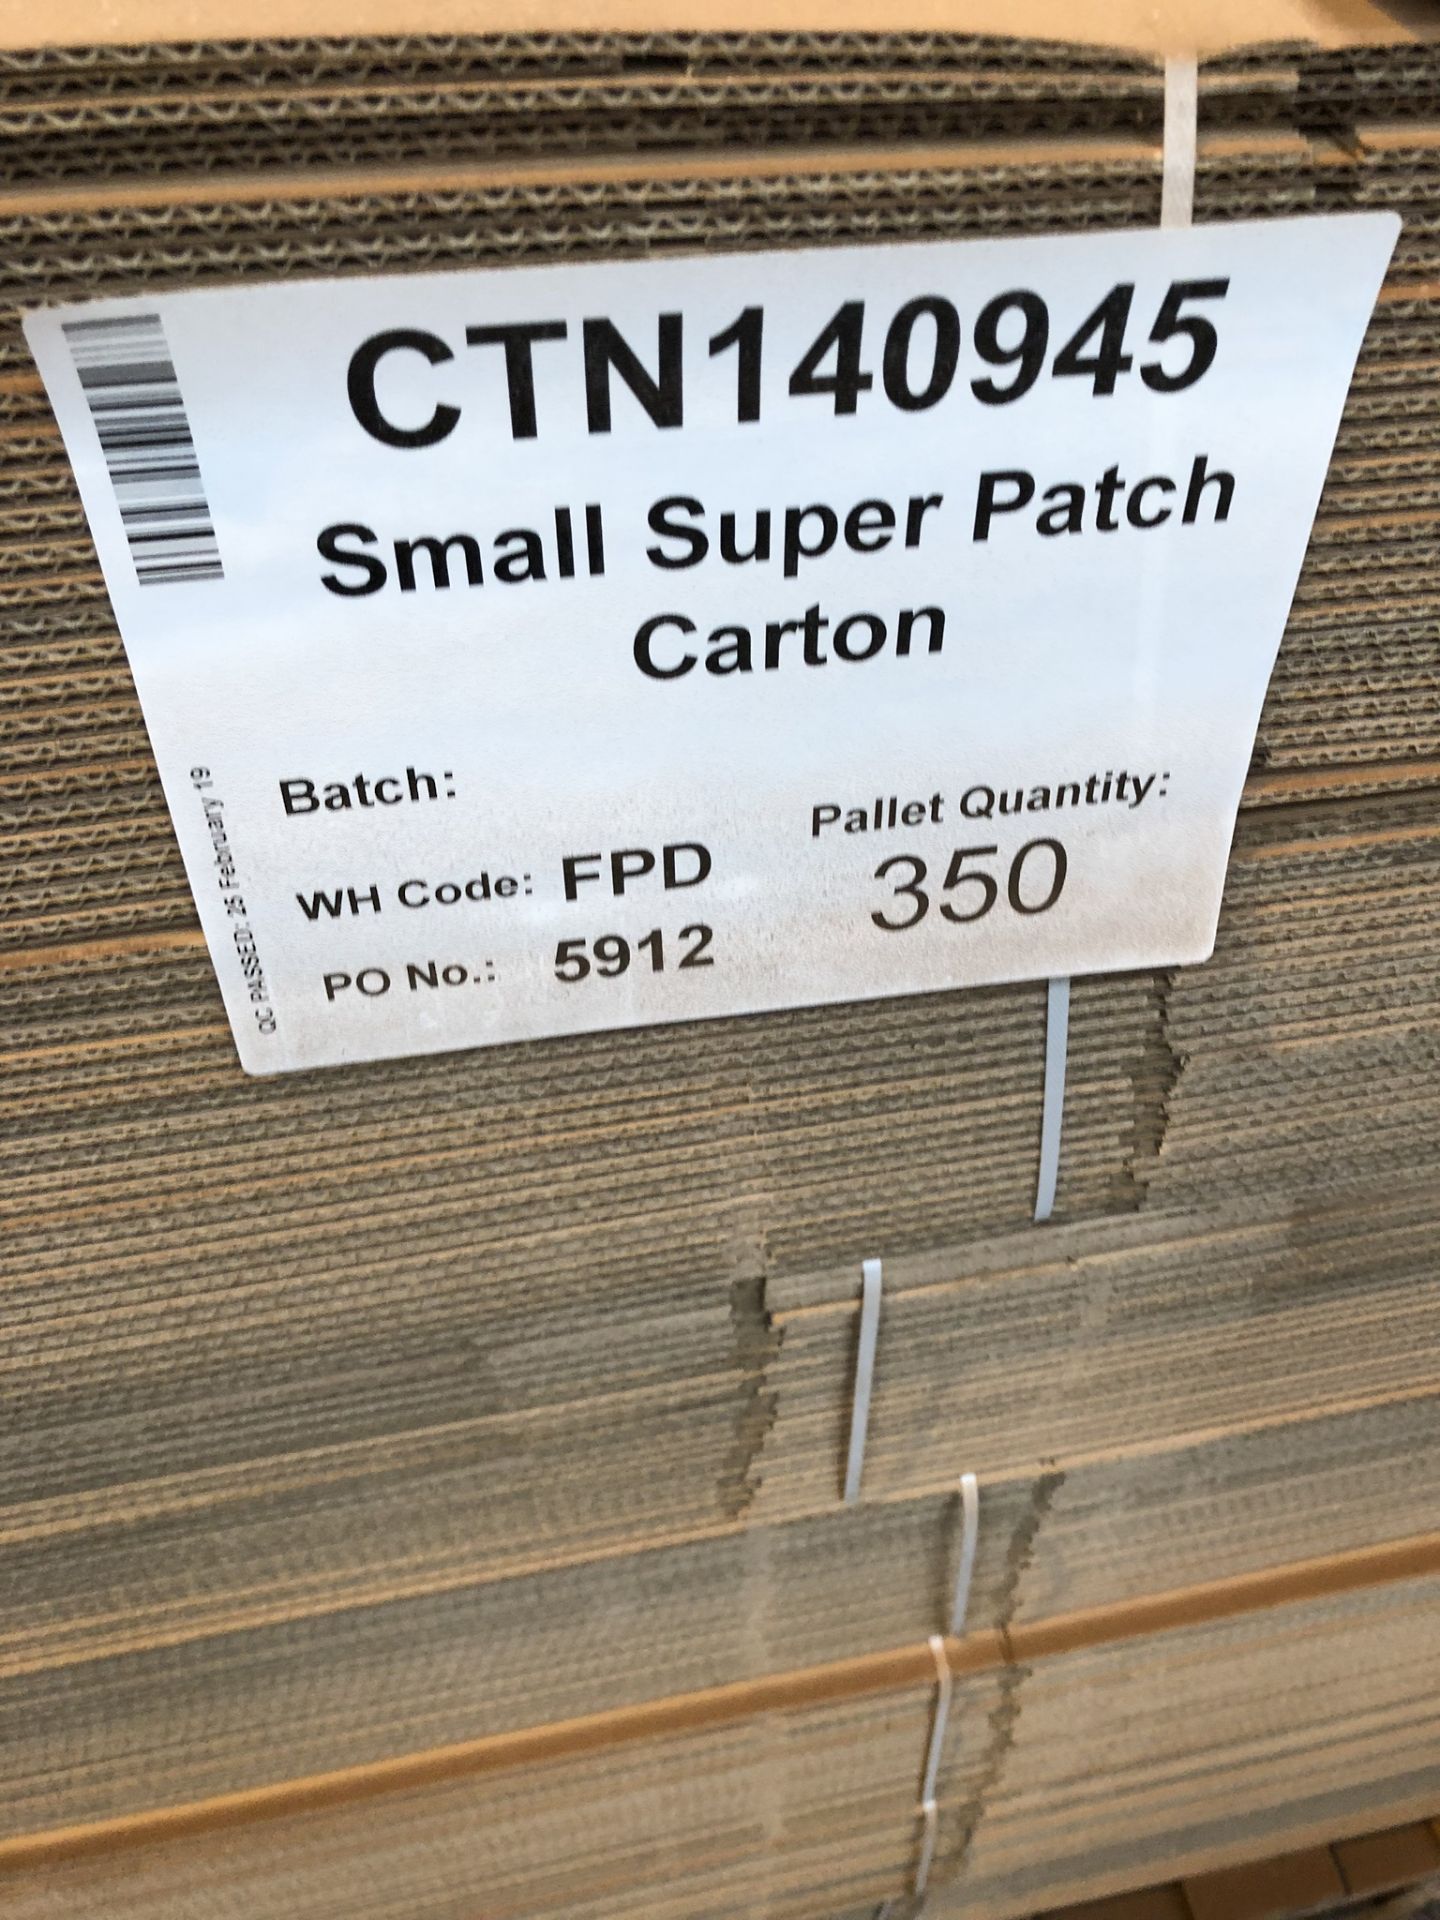 Approximately 350 x Small Super Patch Cartons - Image 2 of 2